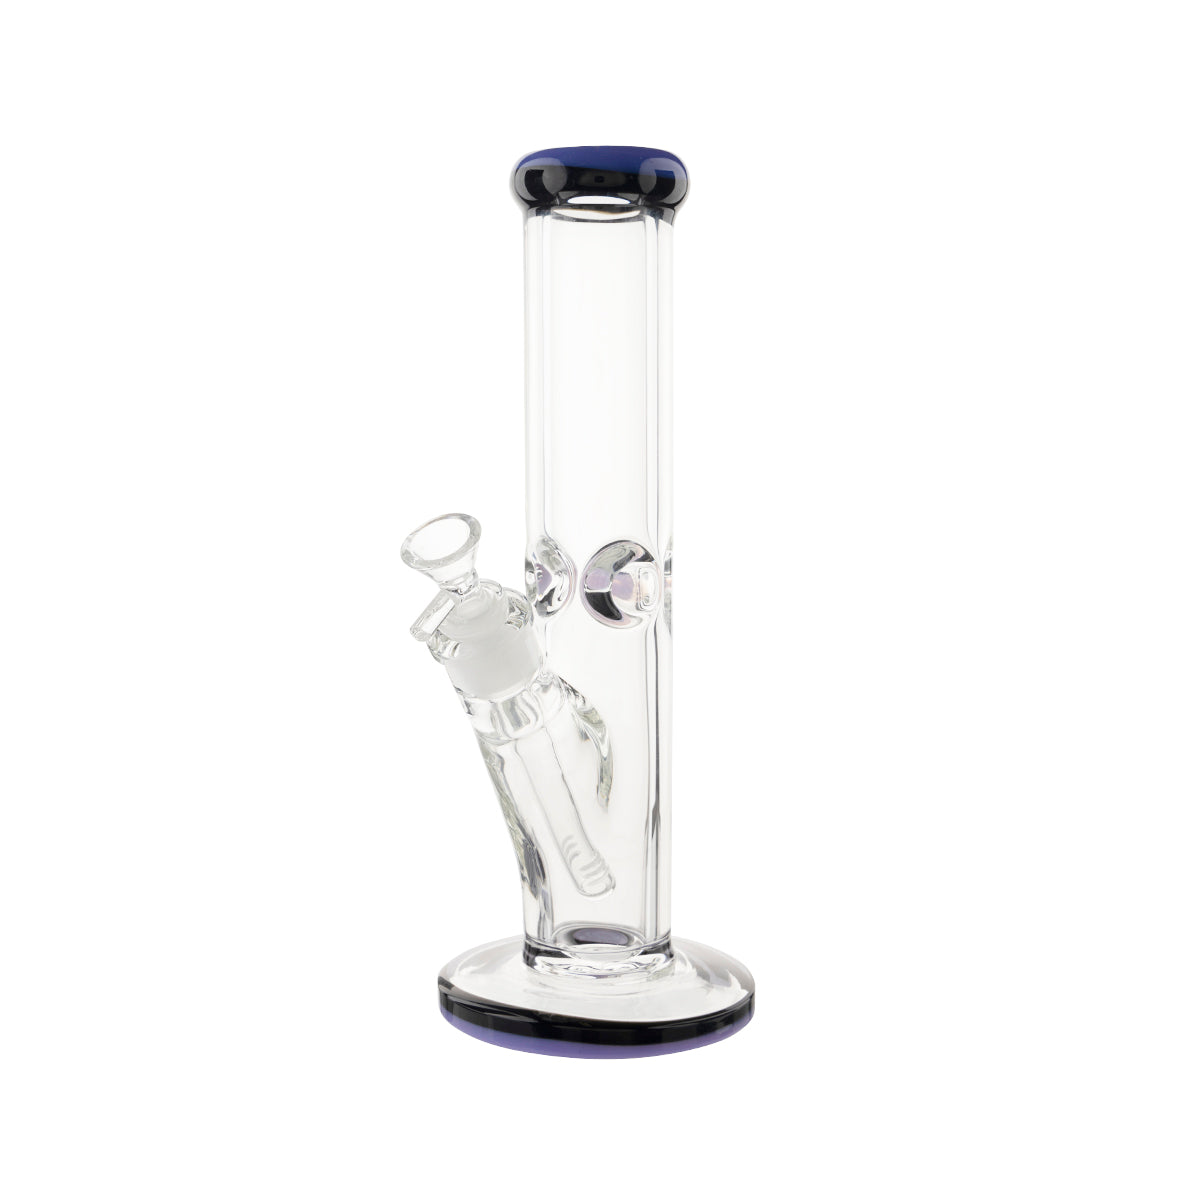 This 12 inche retro straight water pipe is perfect for a smoking sesh with friends.